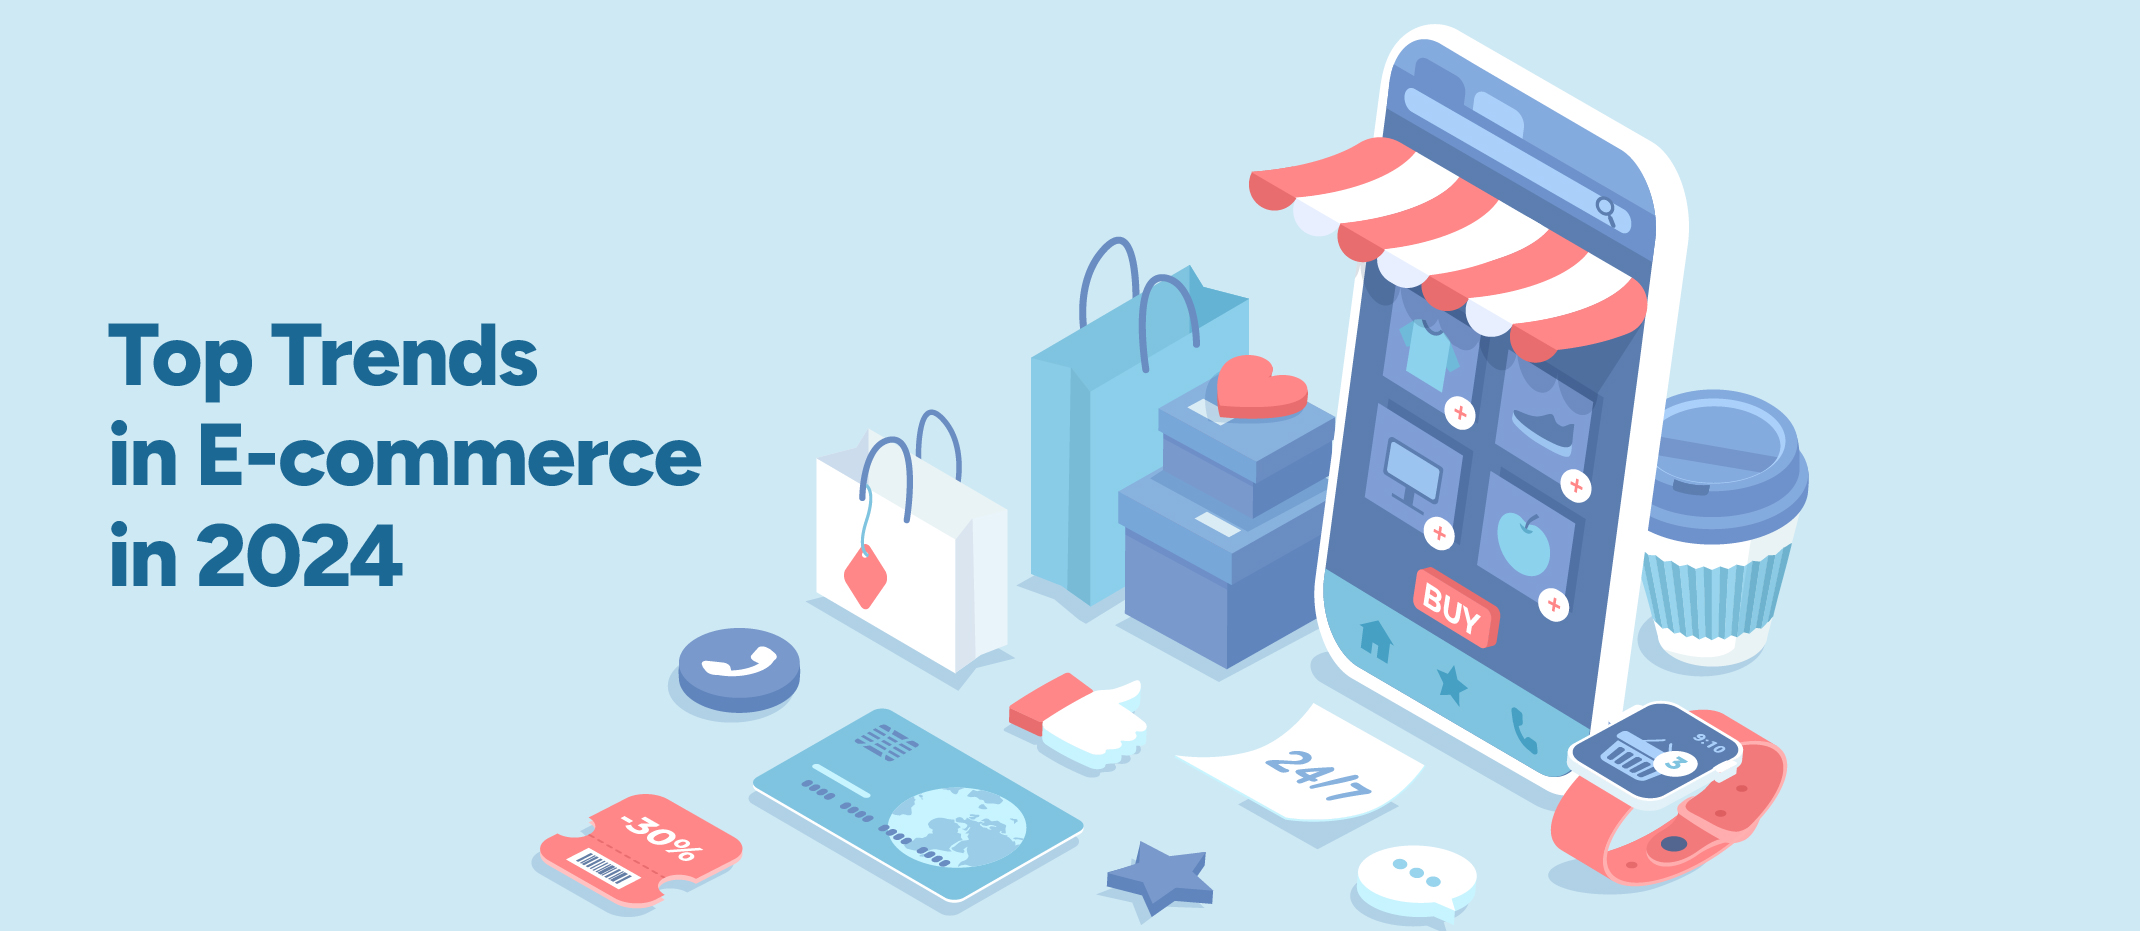 Top Trends in e-commerce to look out for in 2024